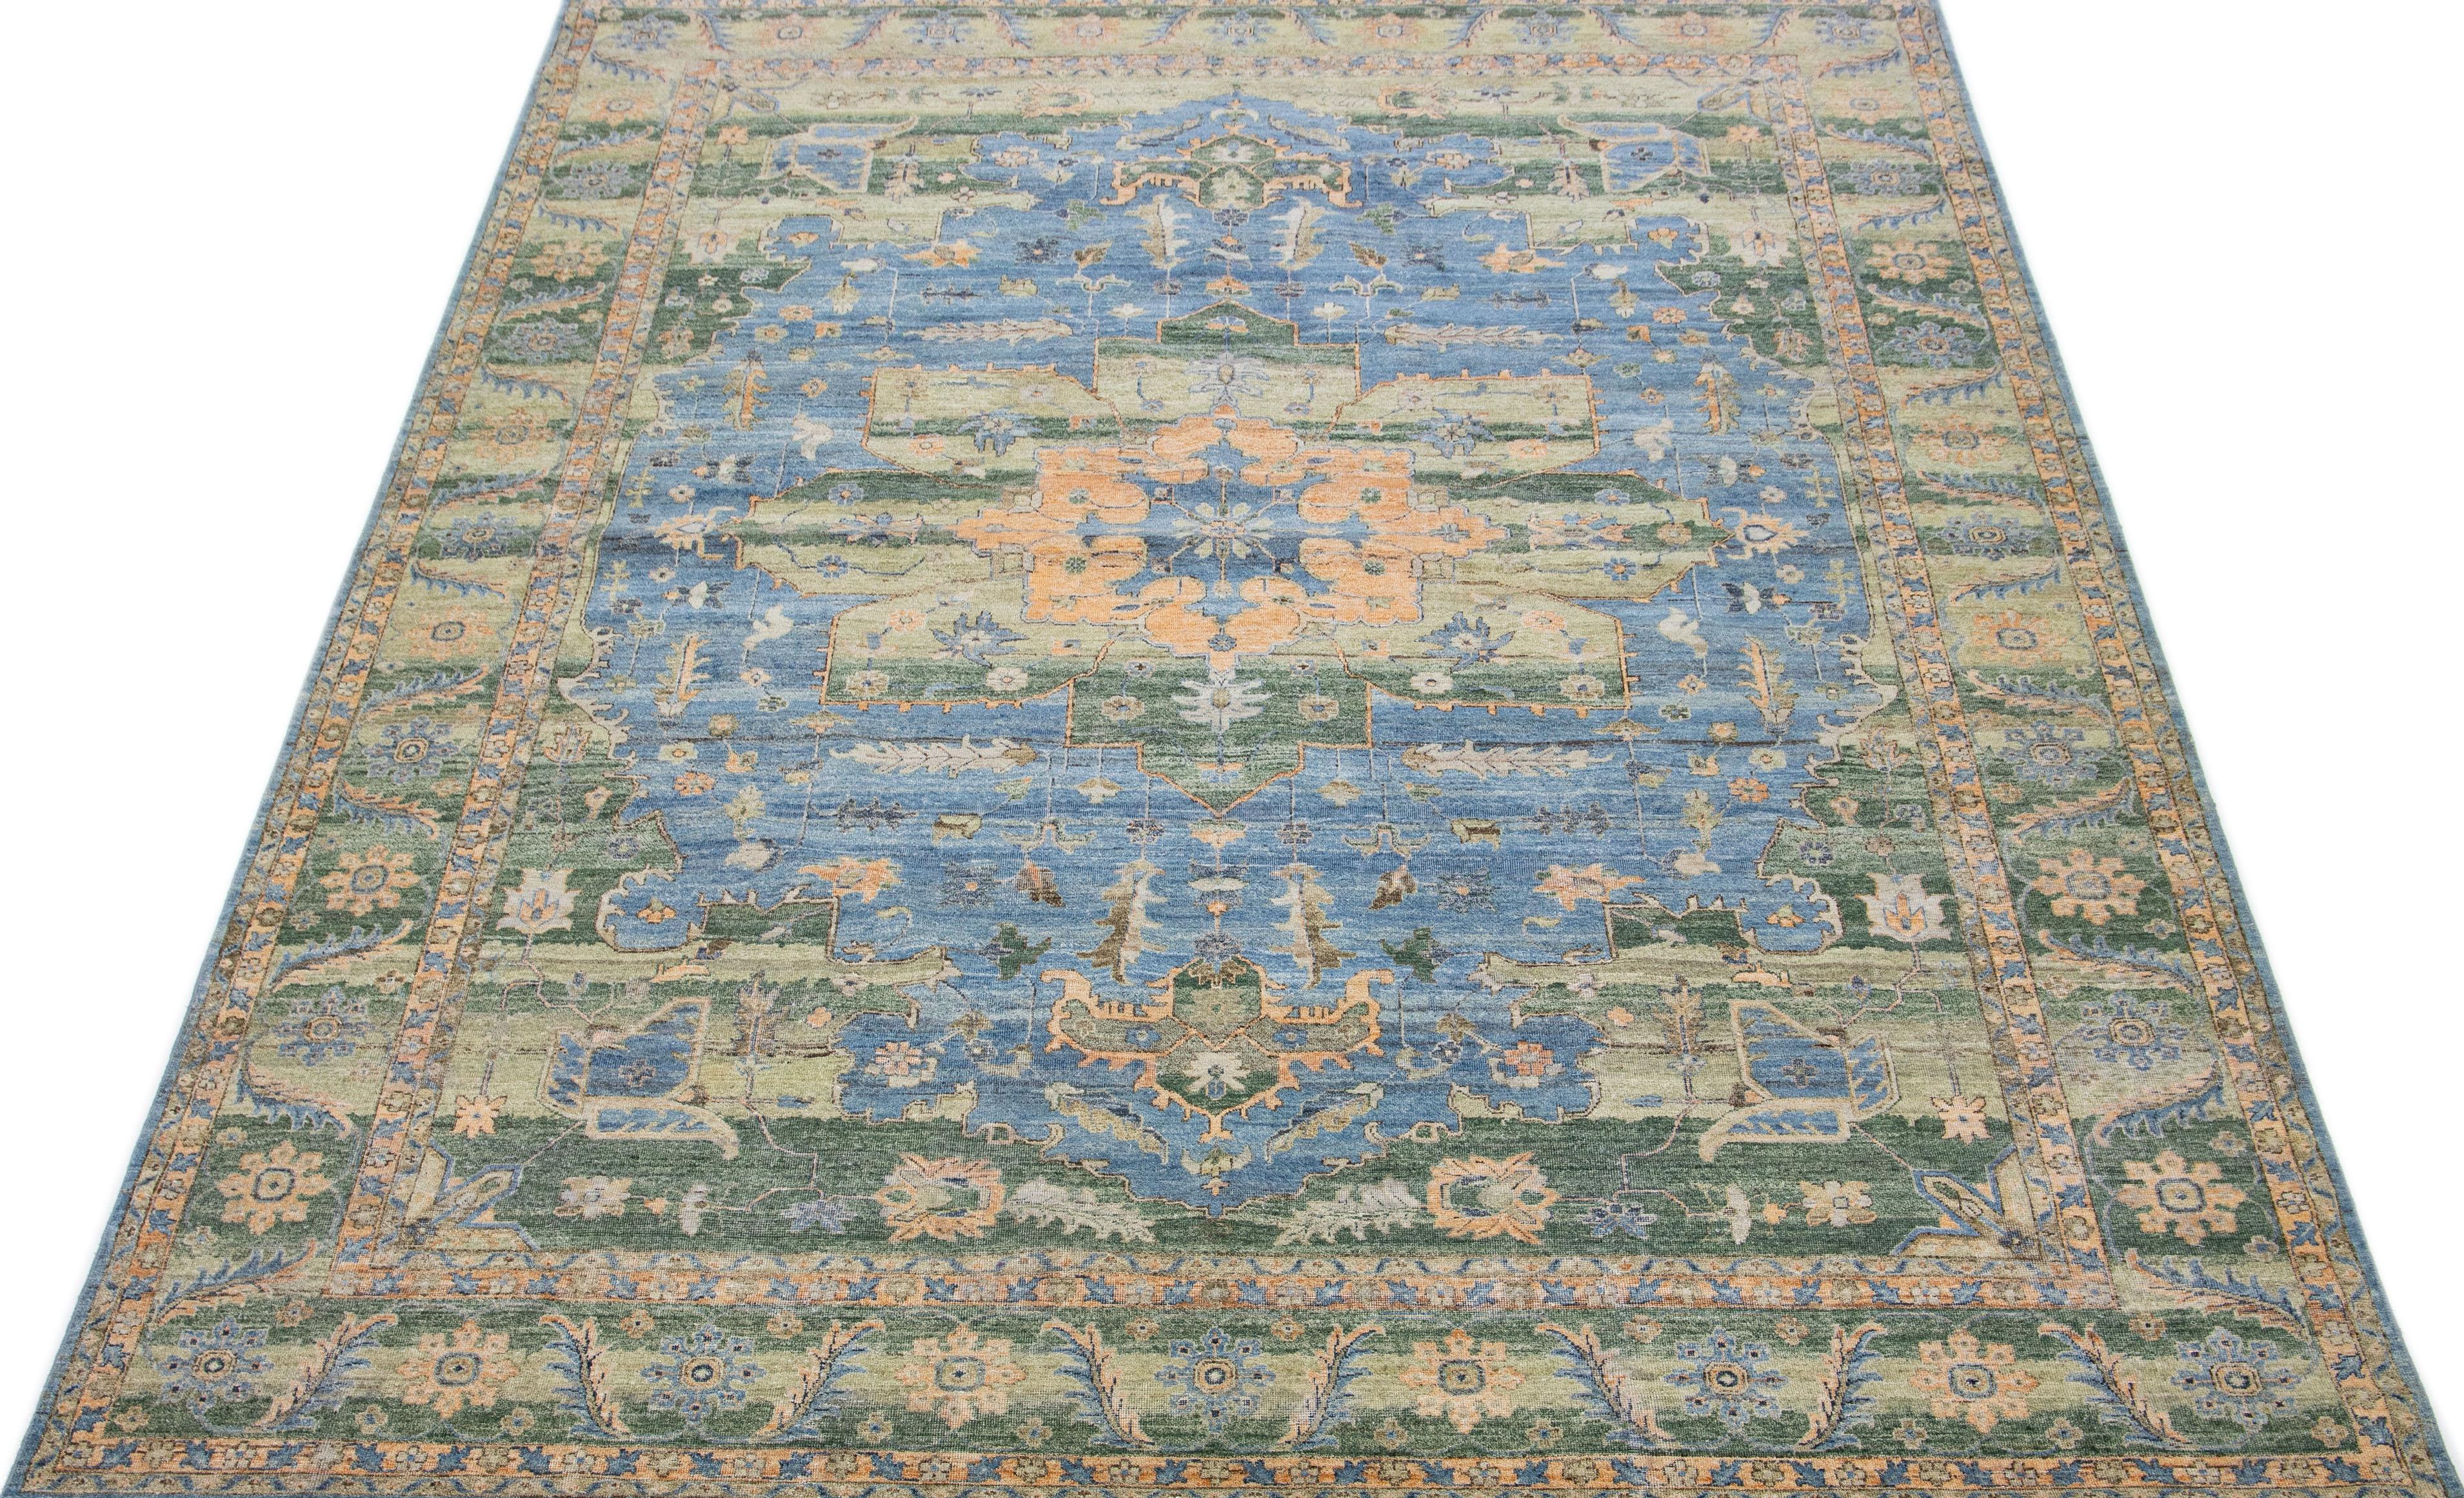 Apadana's Artisan collection offers a unique way to bring a sophisticated antique feel to any home. Boasting unique designs, skilled artisans carefully crafted each piece with hand-weaving techniques. The custom rug from this line boasts a beautiful